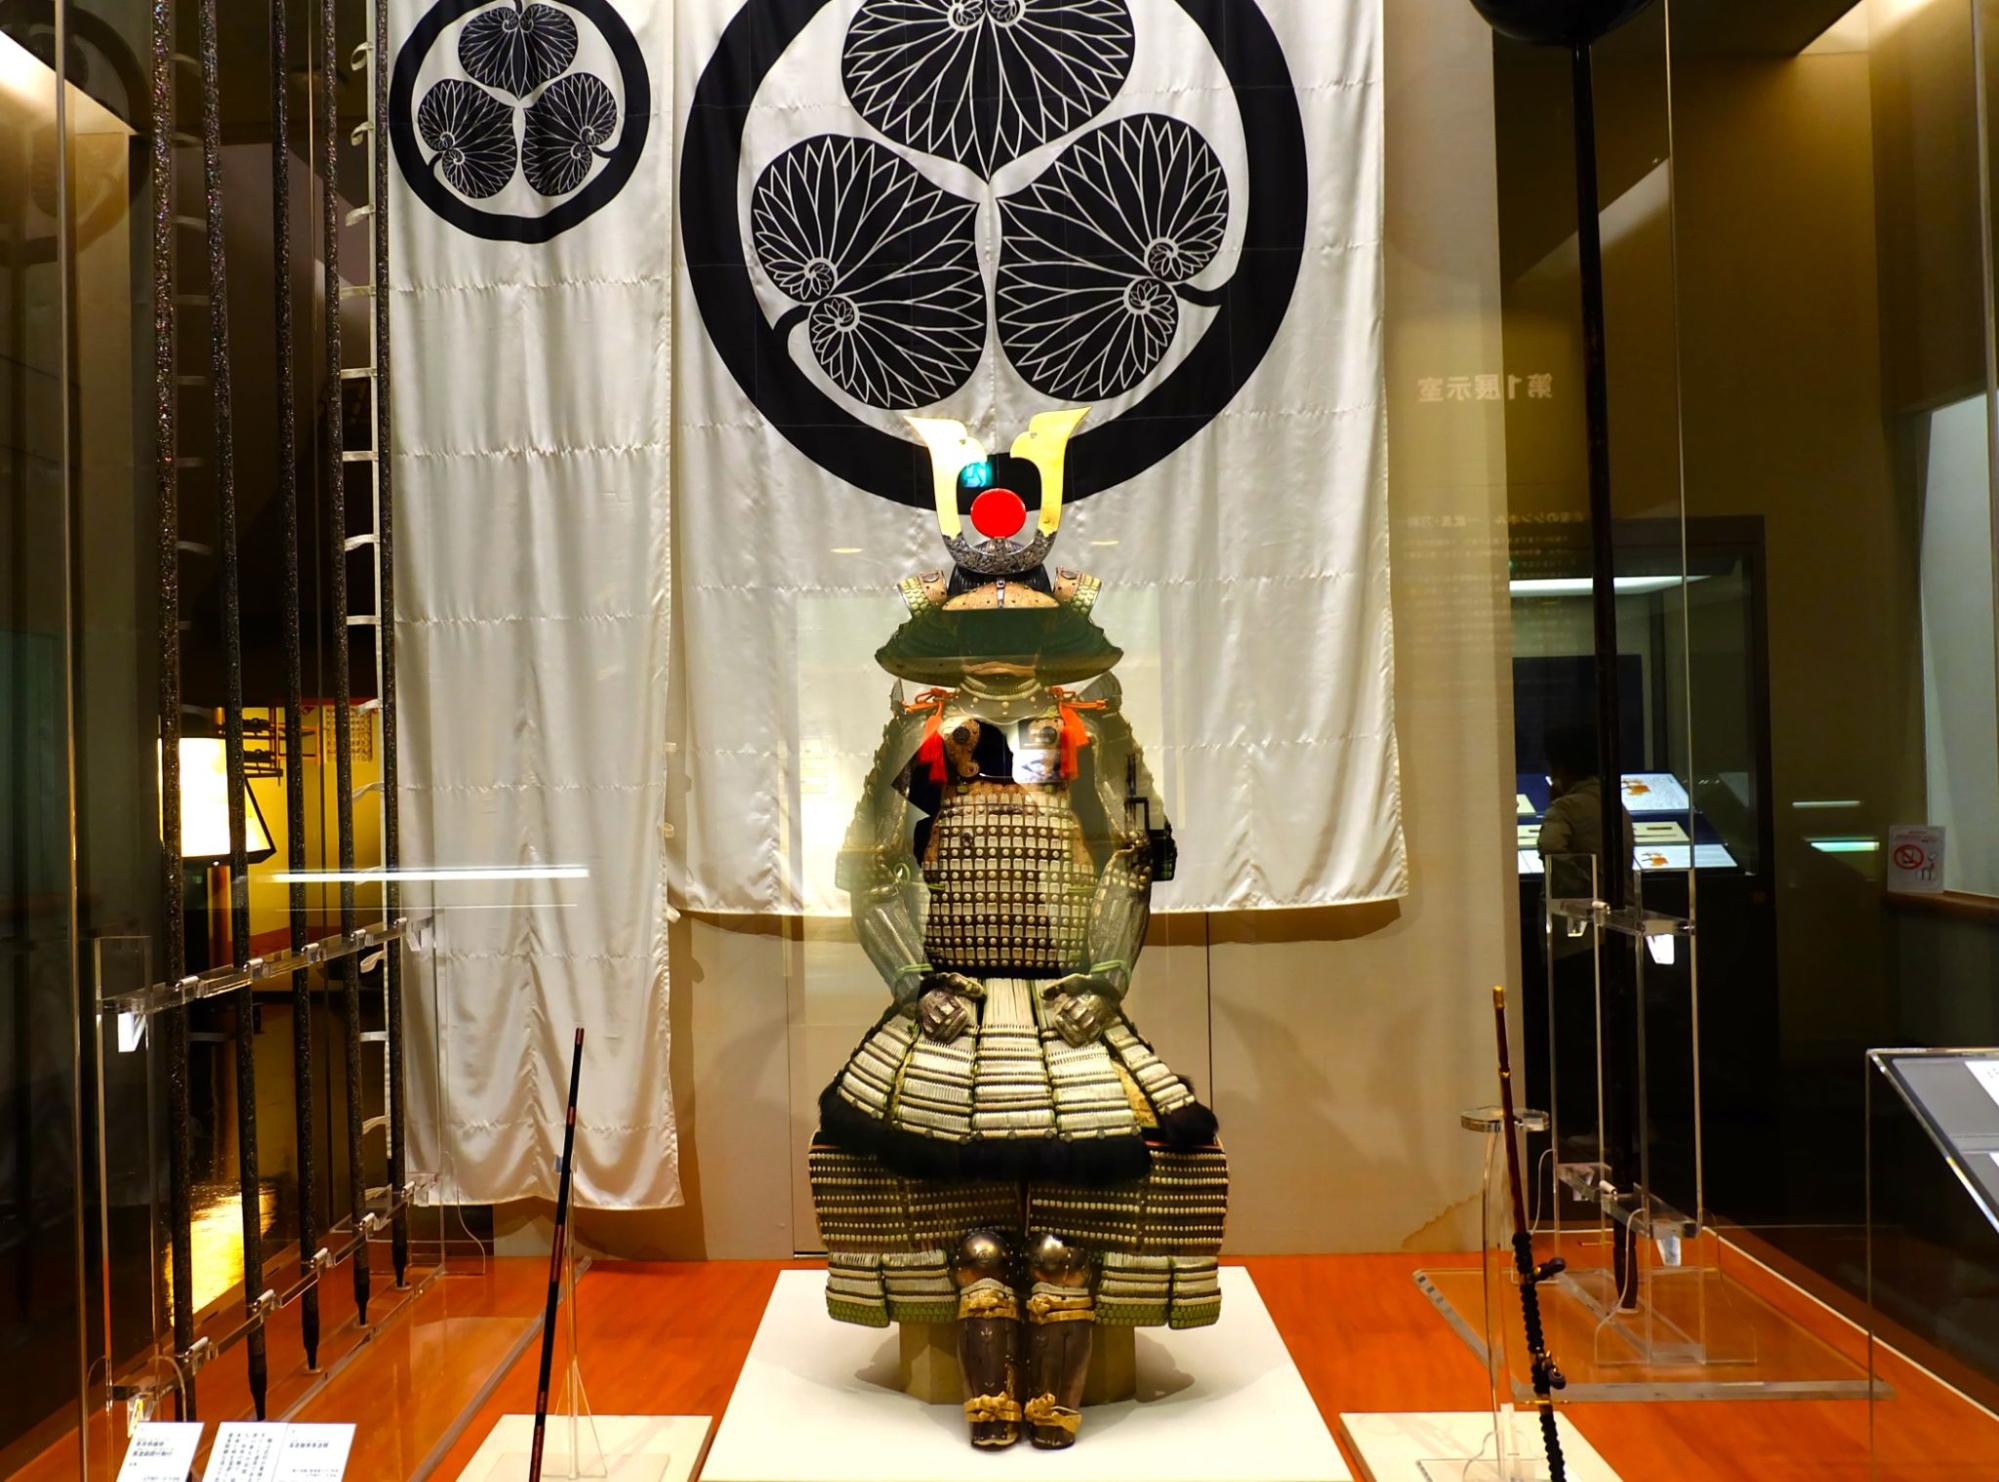 Tokugawa Art Museum: Collection of More than 10,000 Items Including National Treasures!